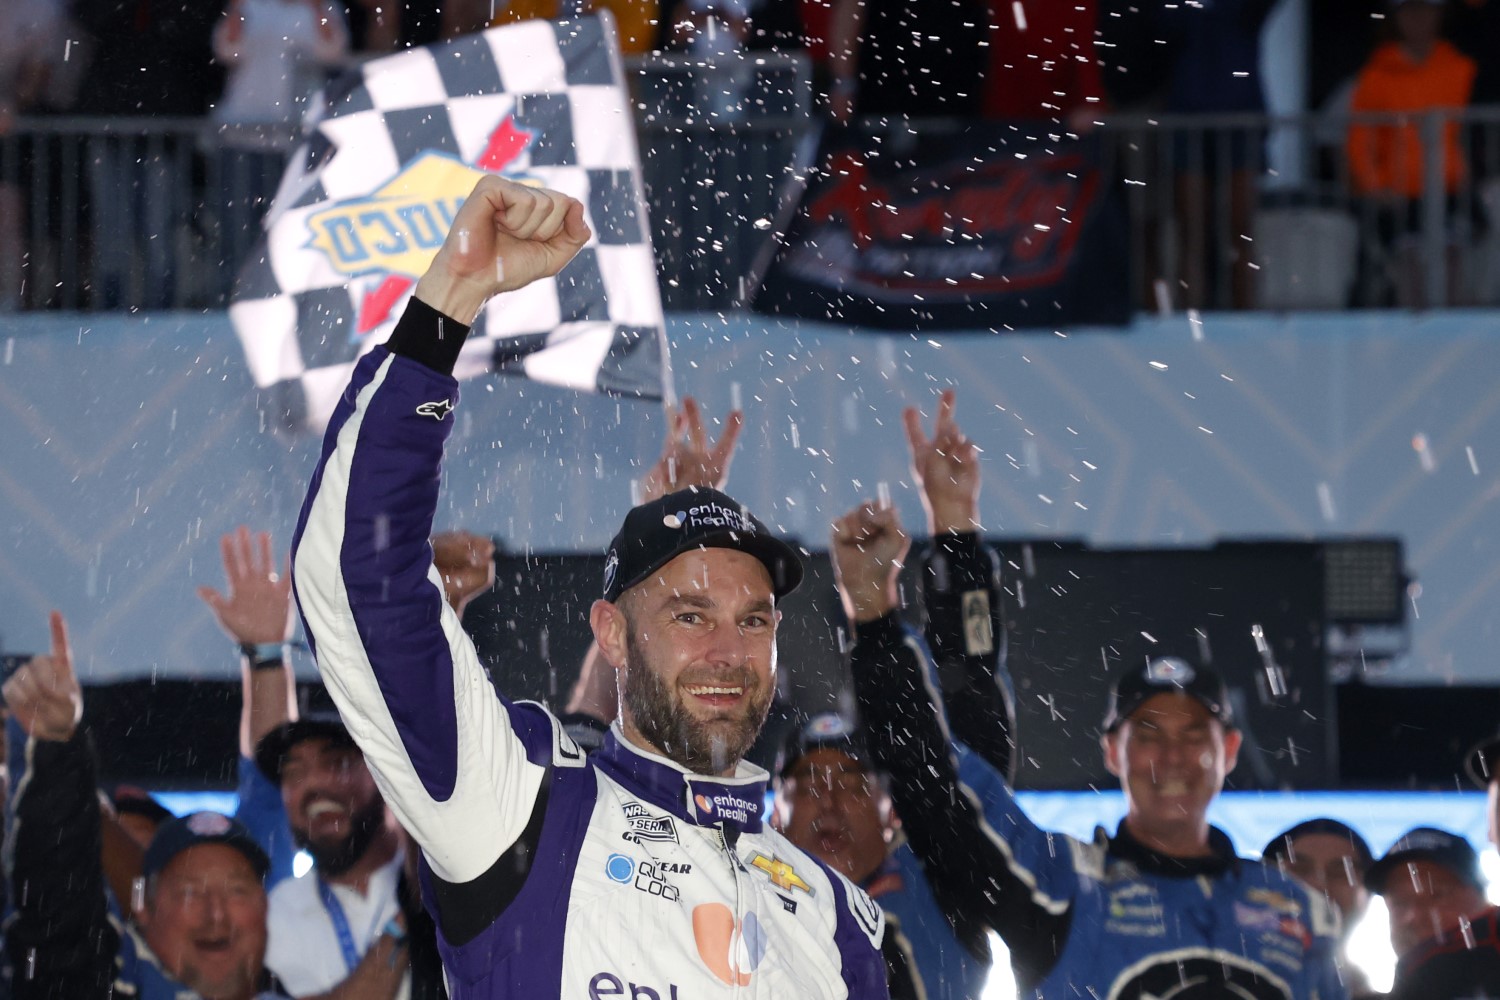 Shane Van Gisbergen, driver of the #91 Enhance Health Chevrolet, celebrates in victory lane after winning the NASCAR Cup Series Grant Park 220 at the Chicago Street Course on July 02, 2023 in Chicago, Illinois. (Photo by Chris Graythen/Getty Images)